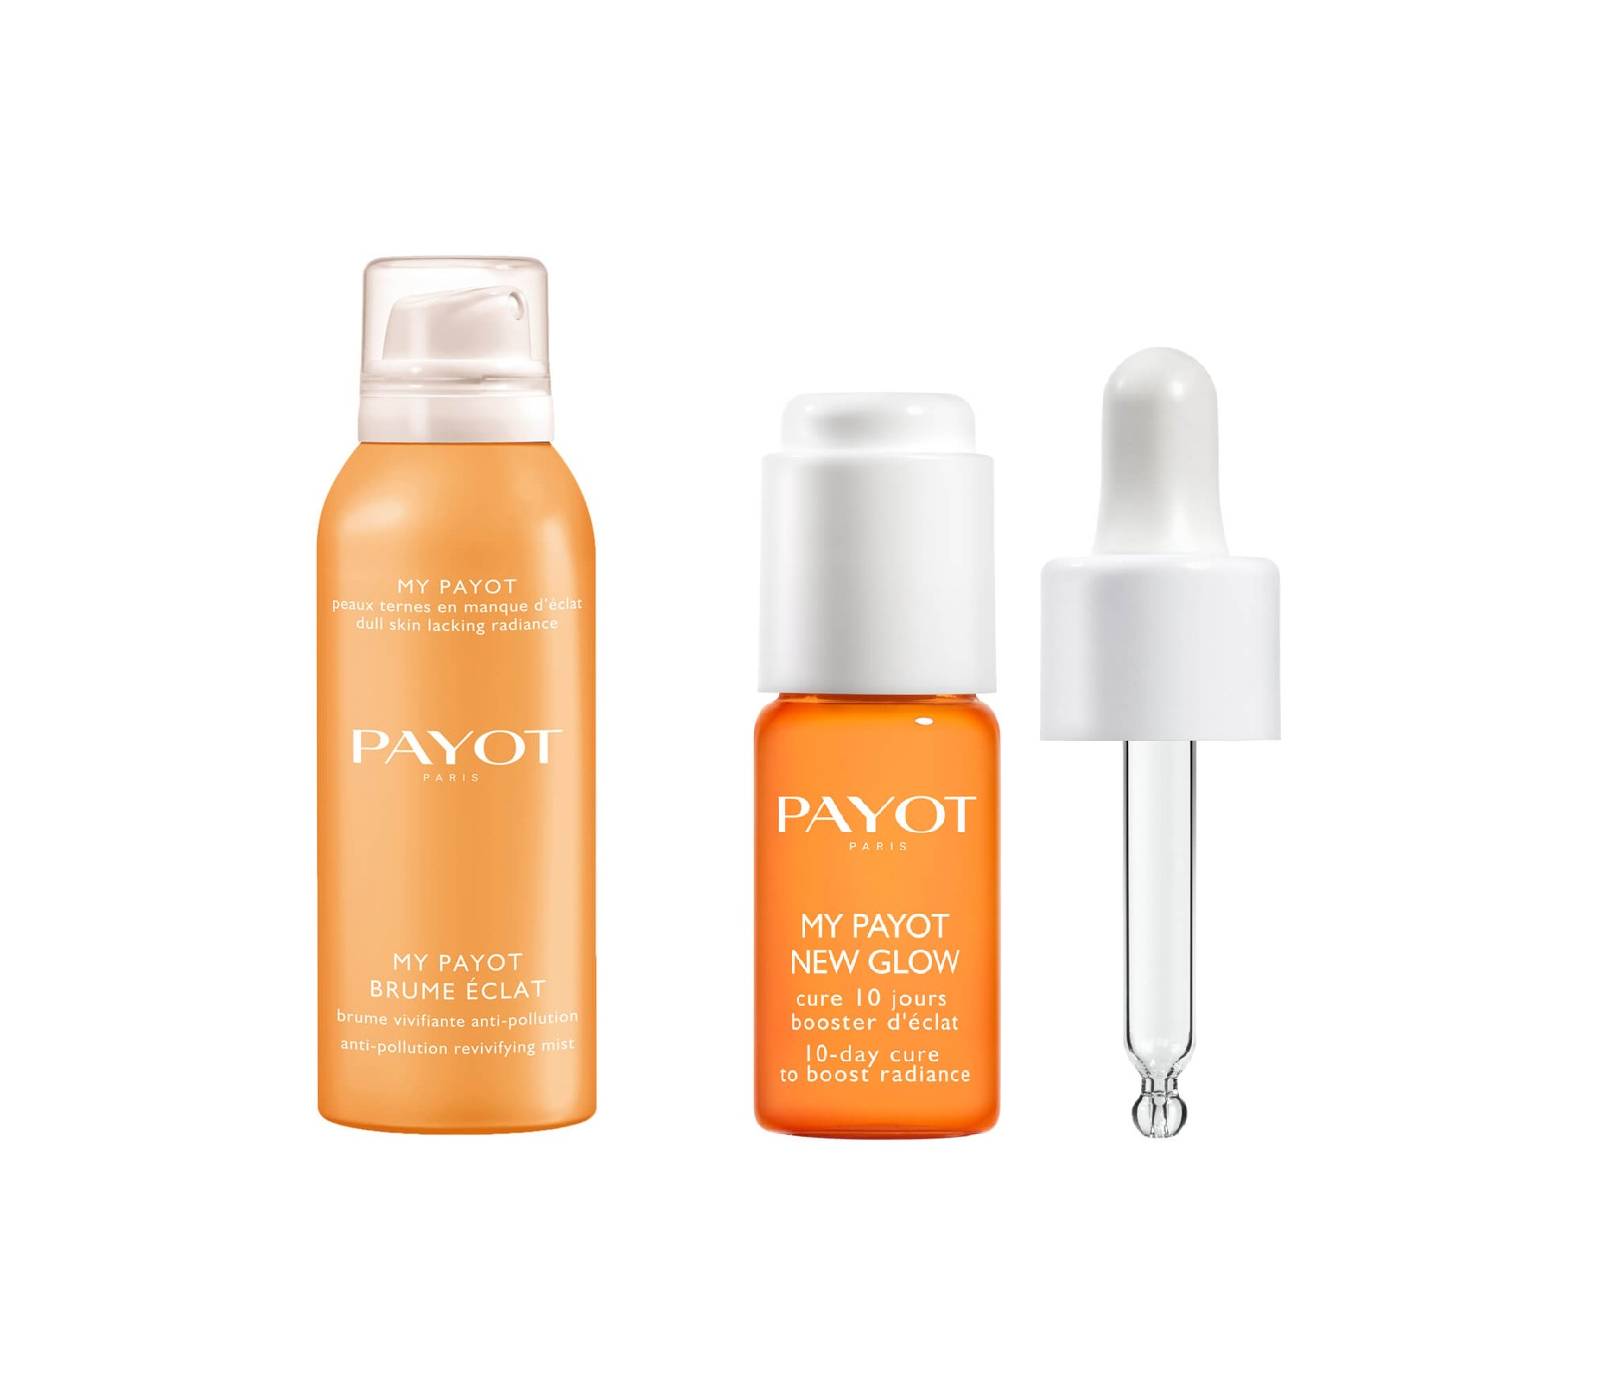 Payot - My Payot Face Mist 125 ml + Payot - My Payot New Glow 10 Days Cure 7 ml - Skjønnhet